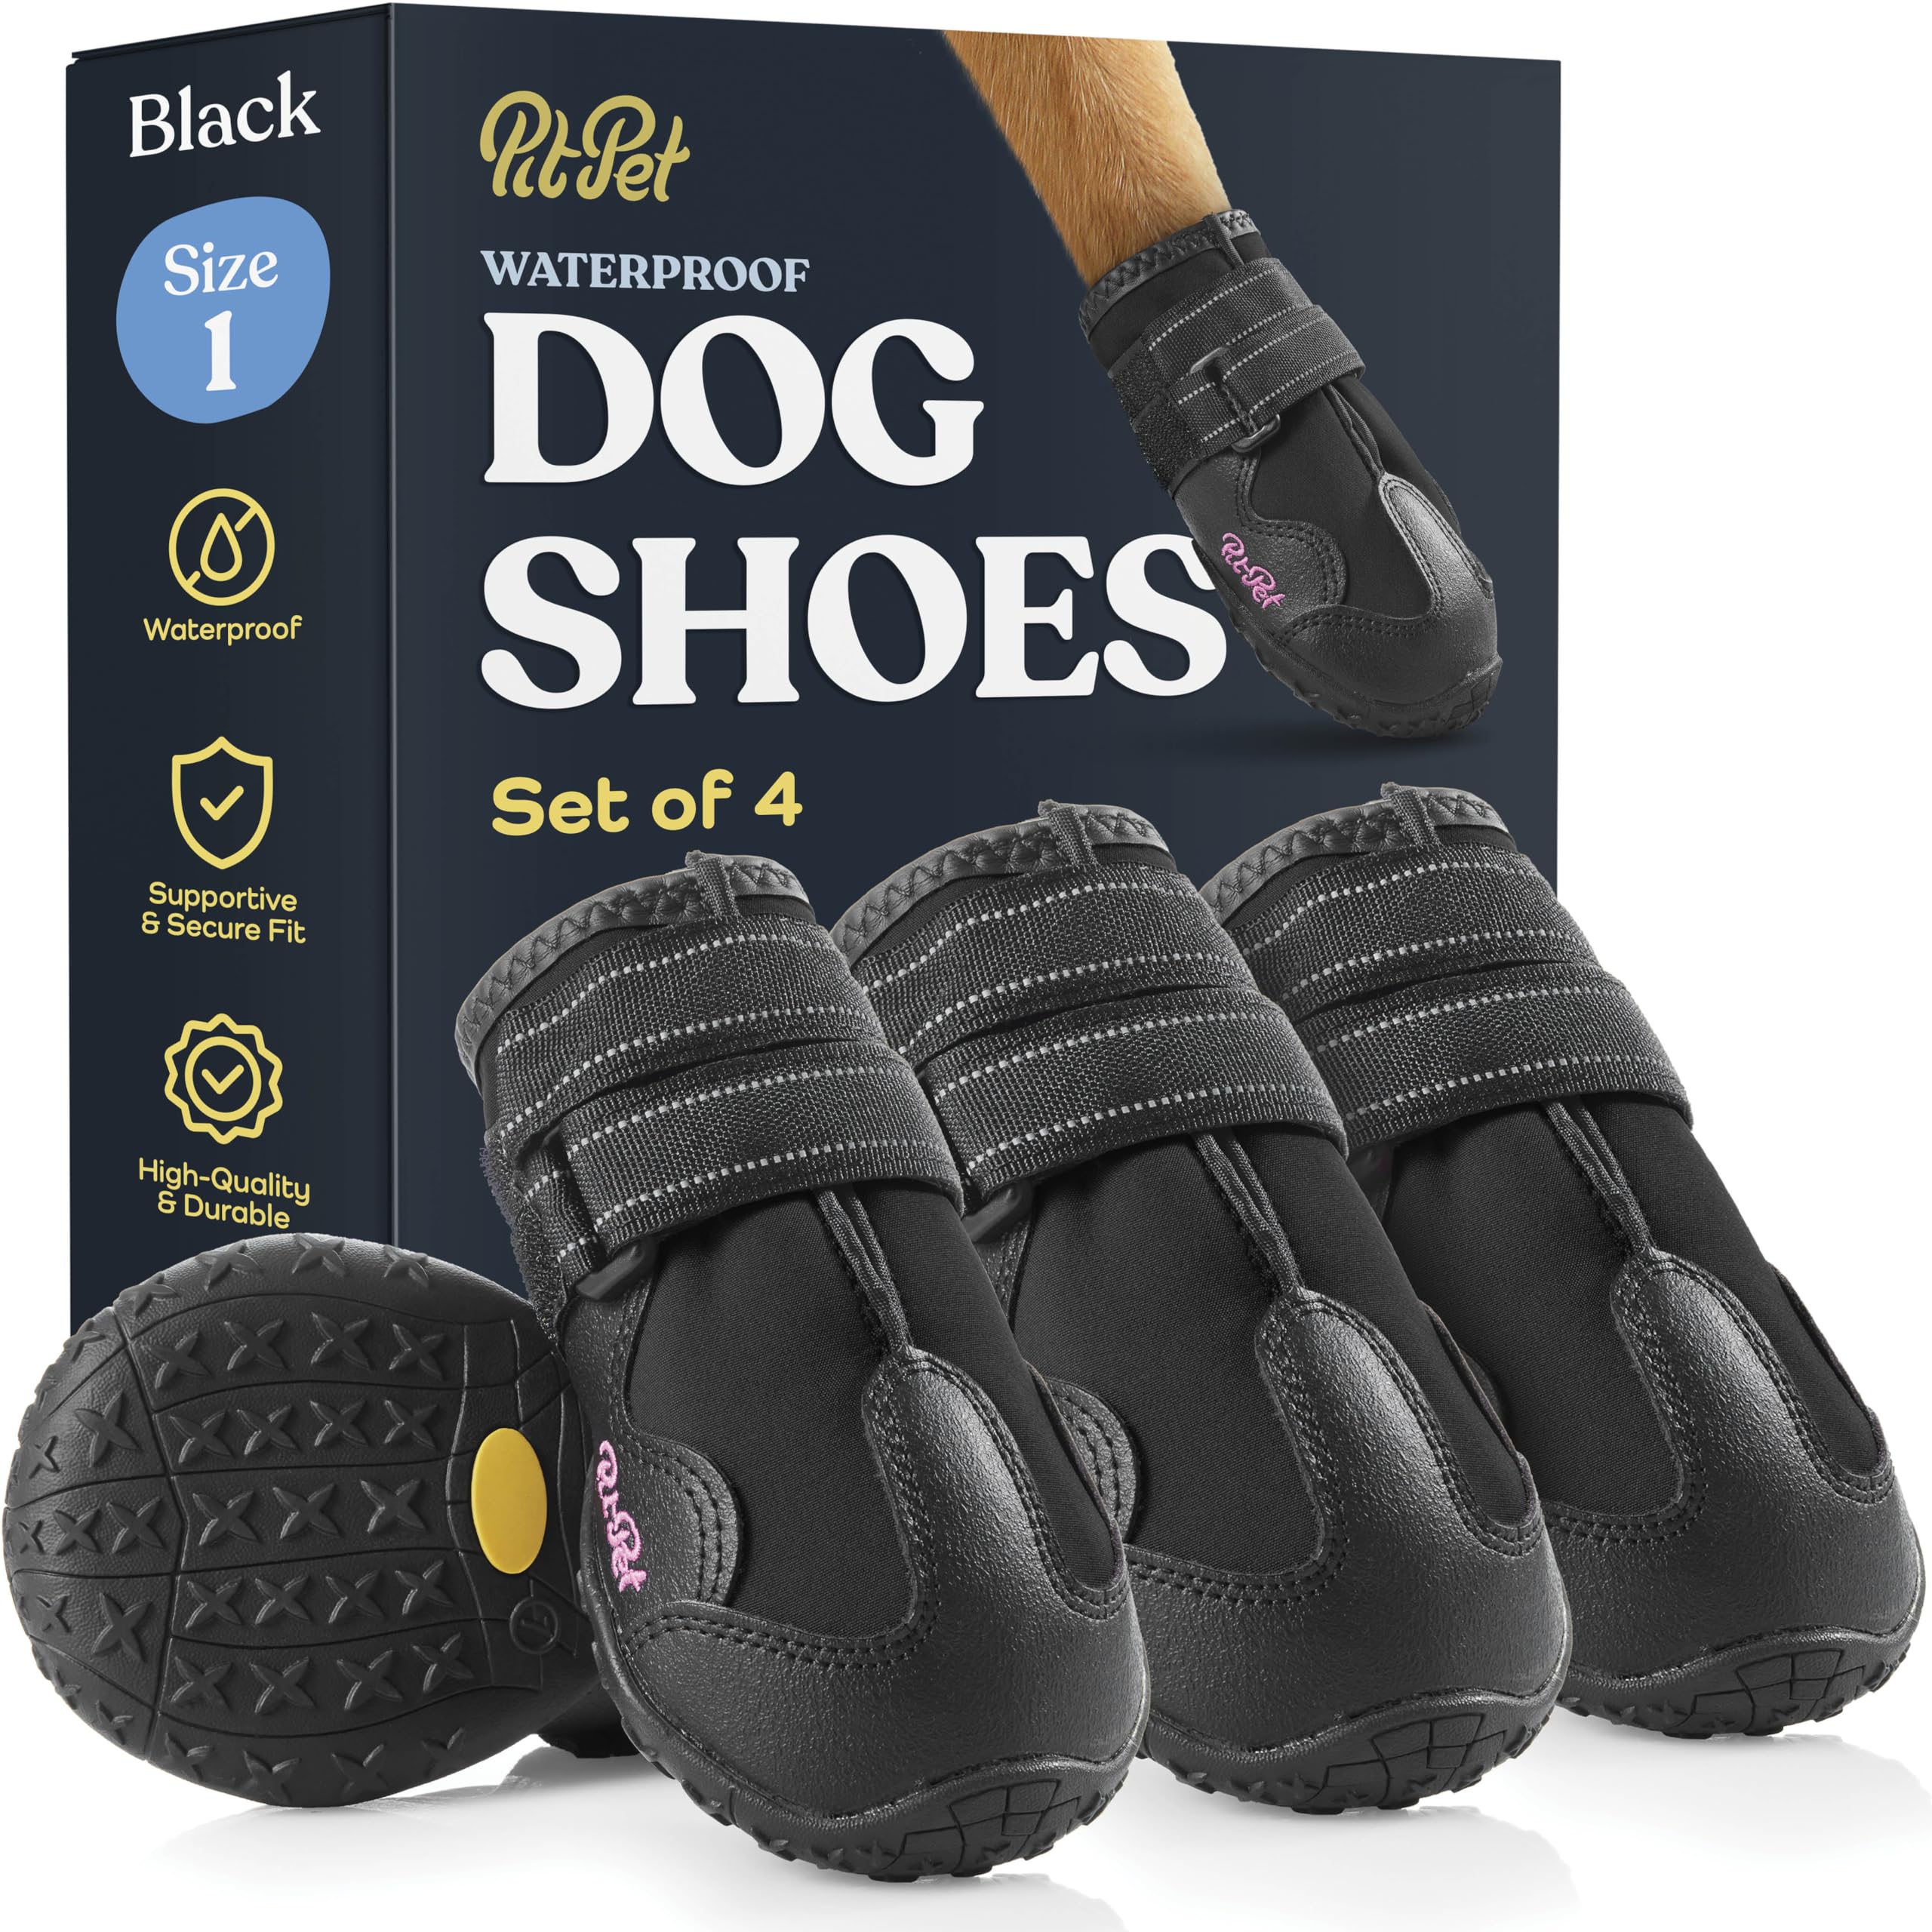 Waterproof Dog Shoes - Stylish Designed Shoes for Dogs - Dog Boots with Non-Slip Rubber Bottom Protects Paw from Hot or Cold Pavement, Dog Booties with Reflective Straps for Dogs Safety, Puppy Shoes.  - Like New